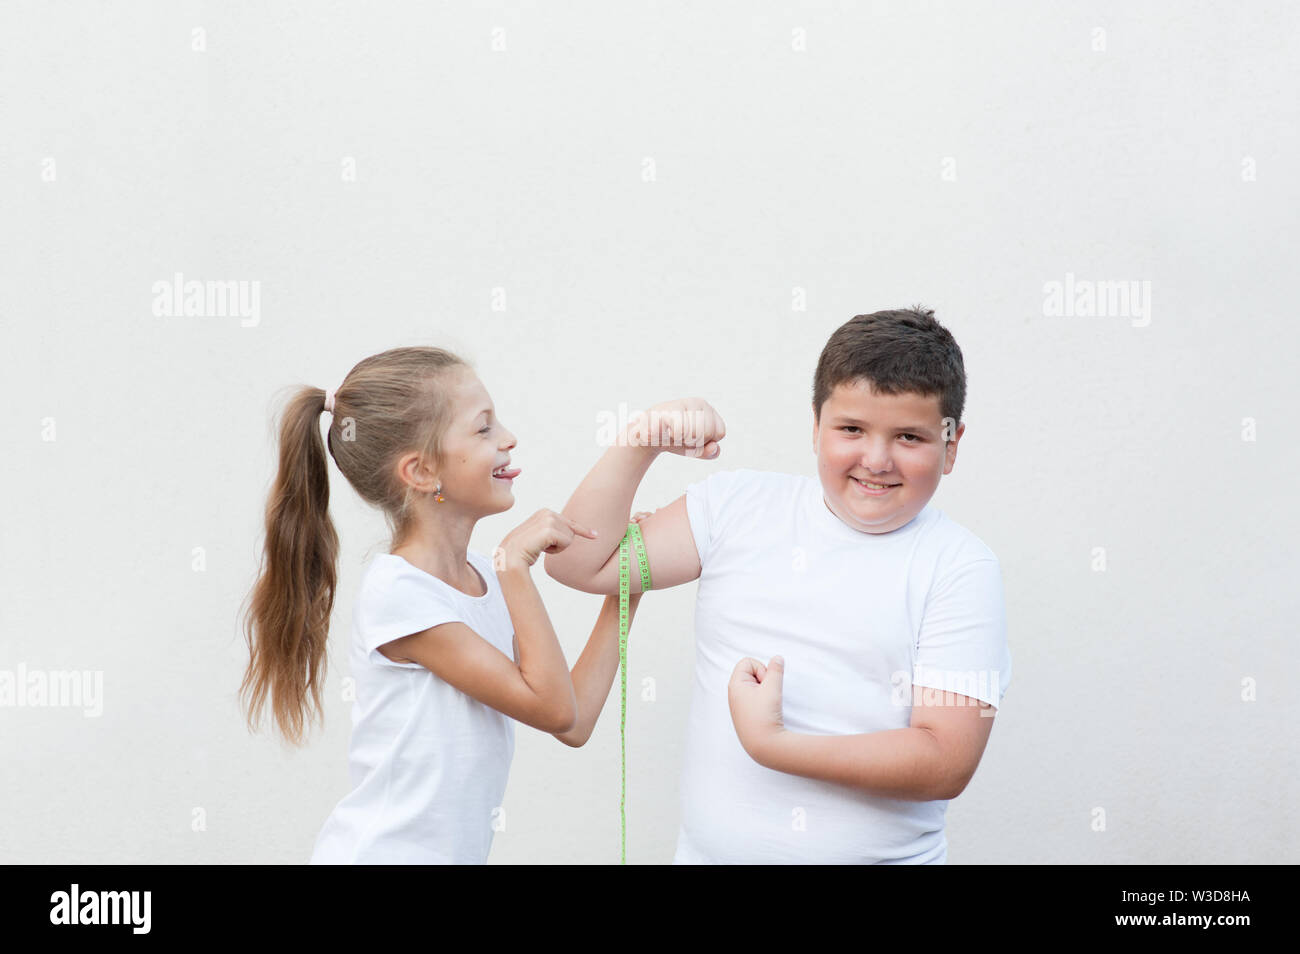 thin little girl in white t-shirt measuring muscle of fat small boy and tease him Stock Photo